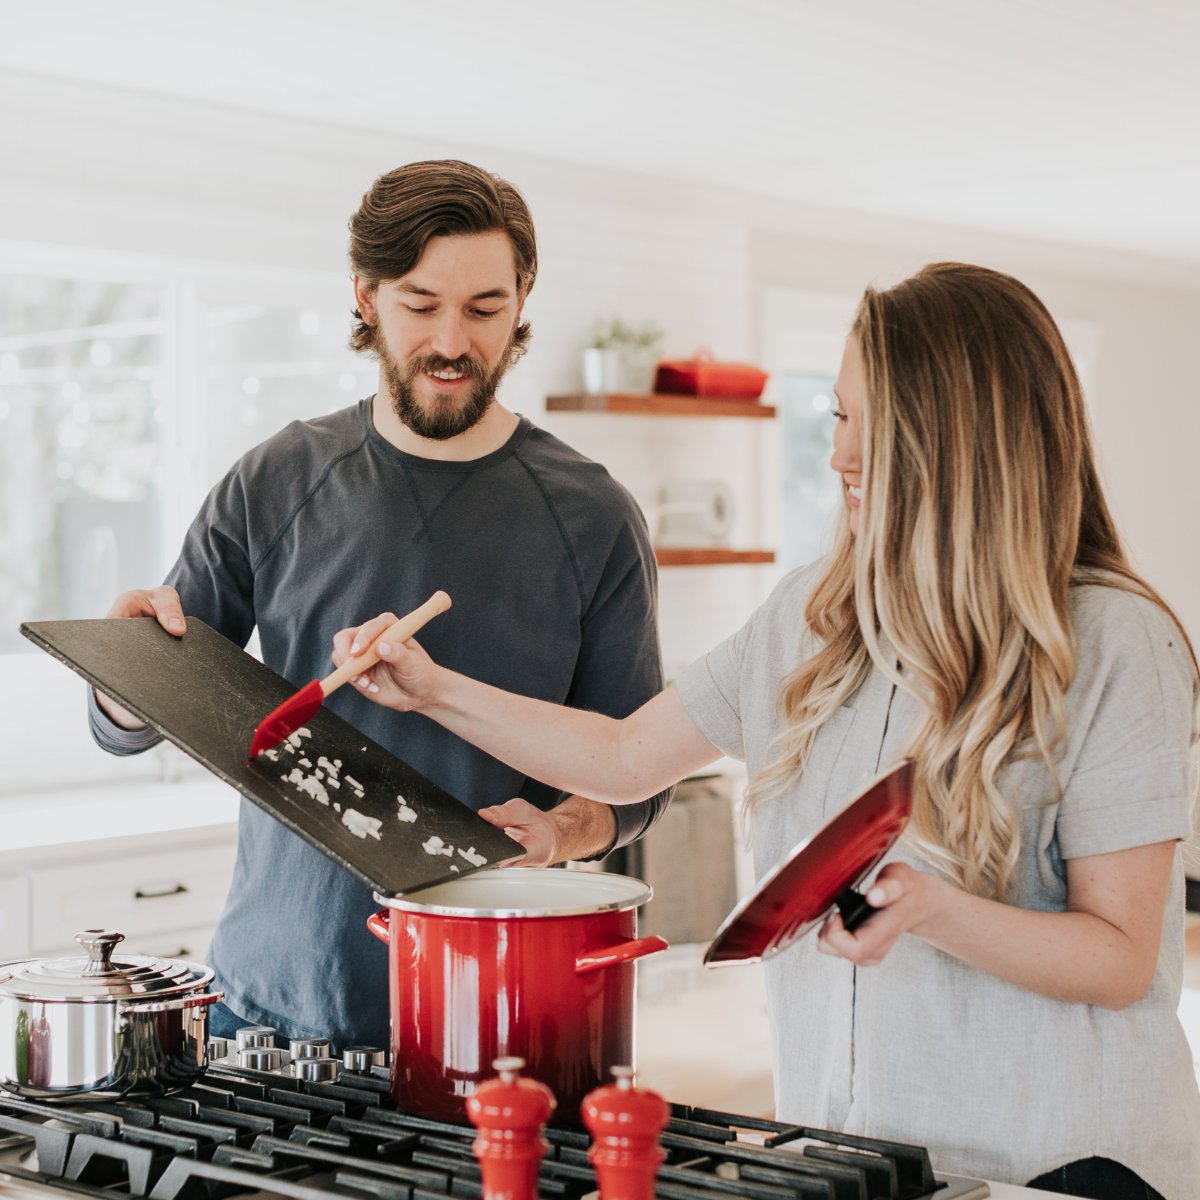 Our Christmas gift to you? A market experience that's smooth, efficient, and worry-free. #DanaJohnsonTeam #ListingAgent #BuyersAgent #409Realtor #StagingConsultant #Stager #RemaxOne